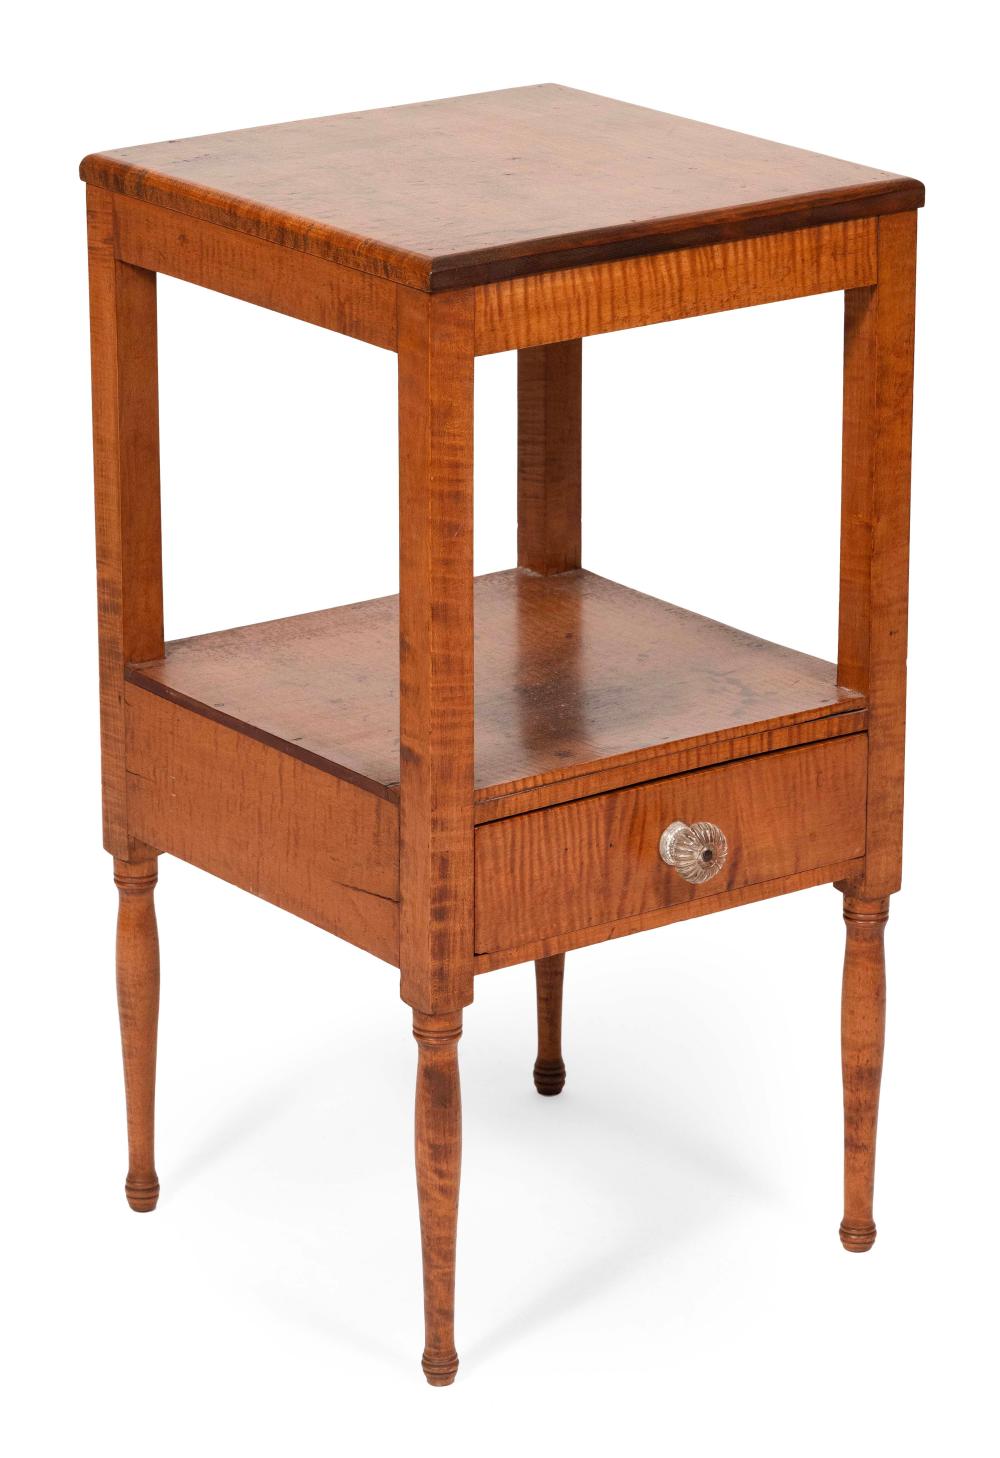 TIGER MAPLE TWO-TIER STAND 19TH